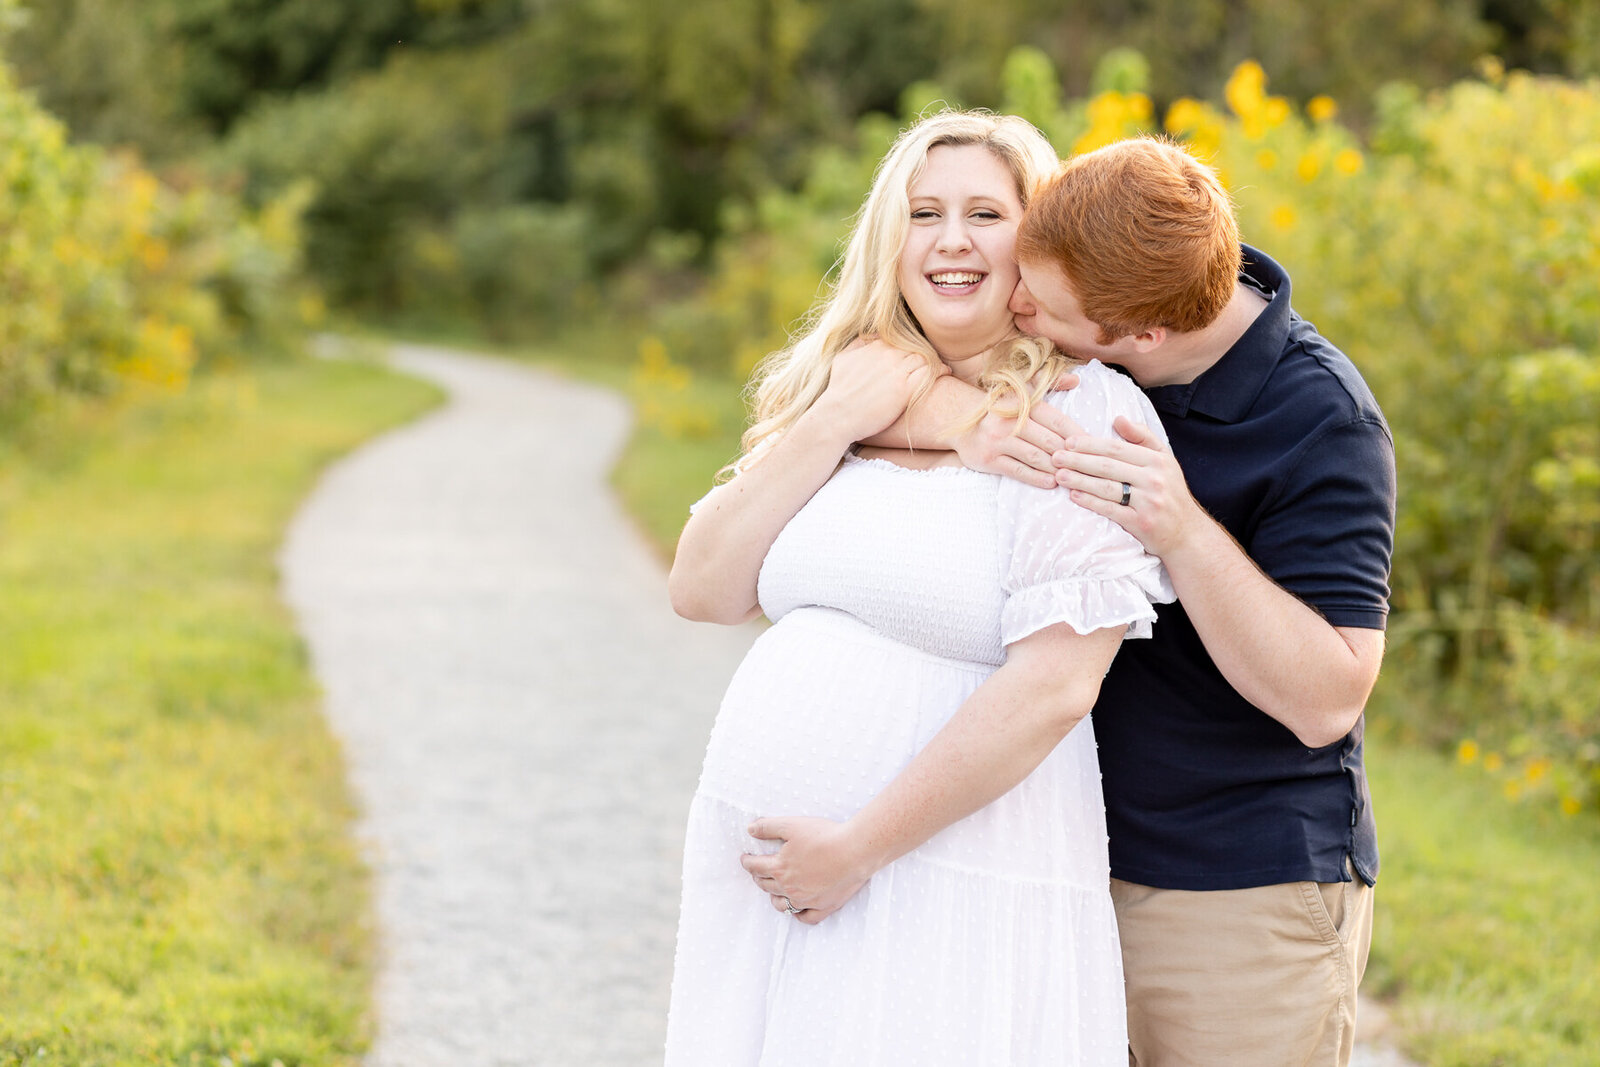 outdoor_maternity_photography_session_Louisville_KY_photographer_golden_hour-4